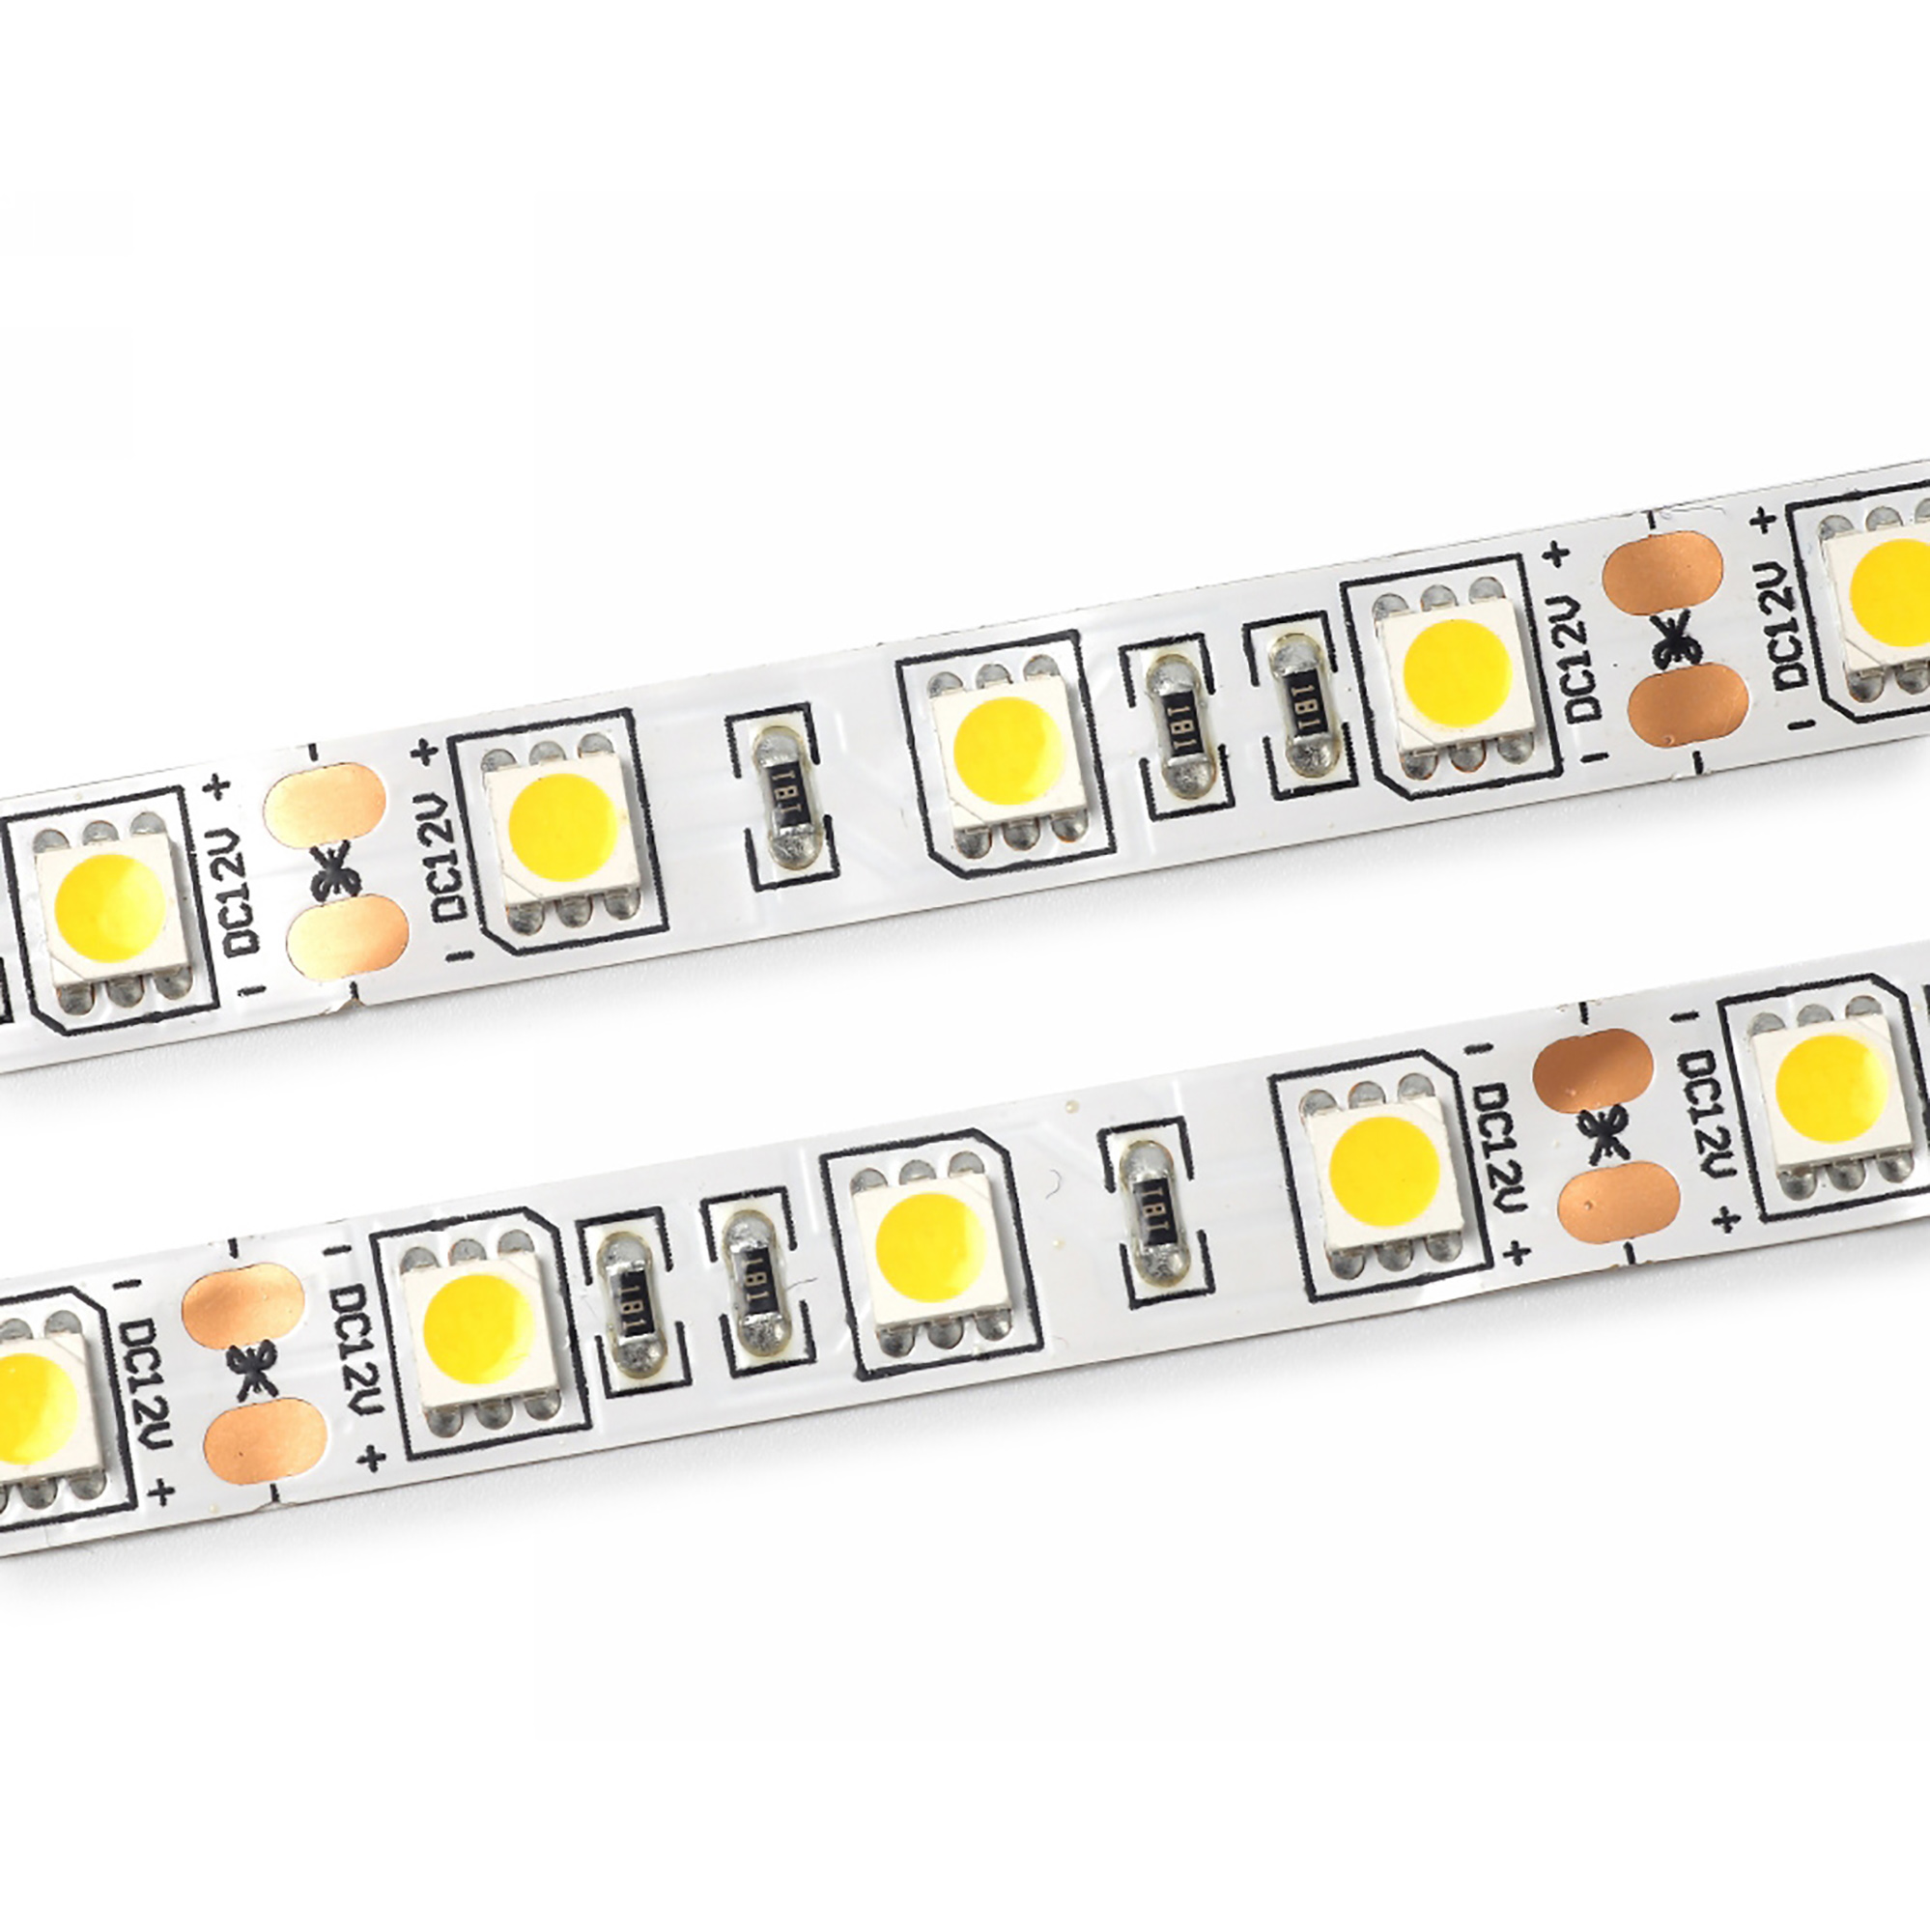 DX700035  Axios Select 5mx10mm 12V 72W LED Strip 1200lm/m 4000K IP20